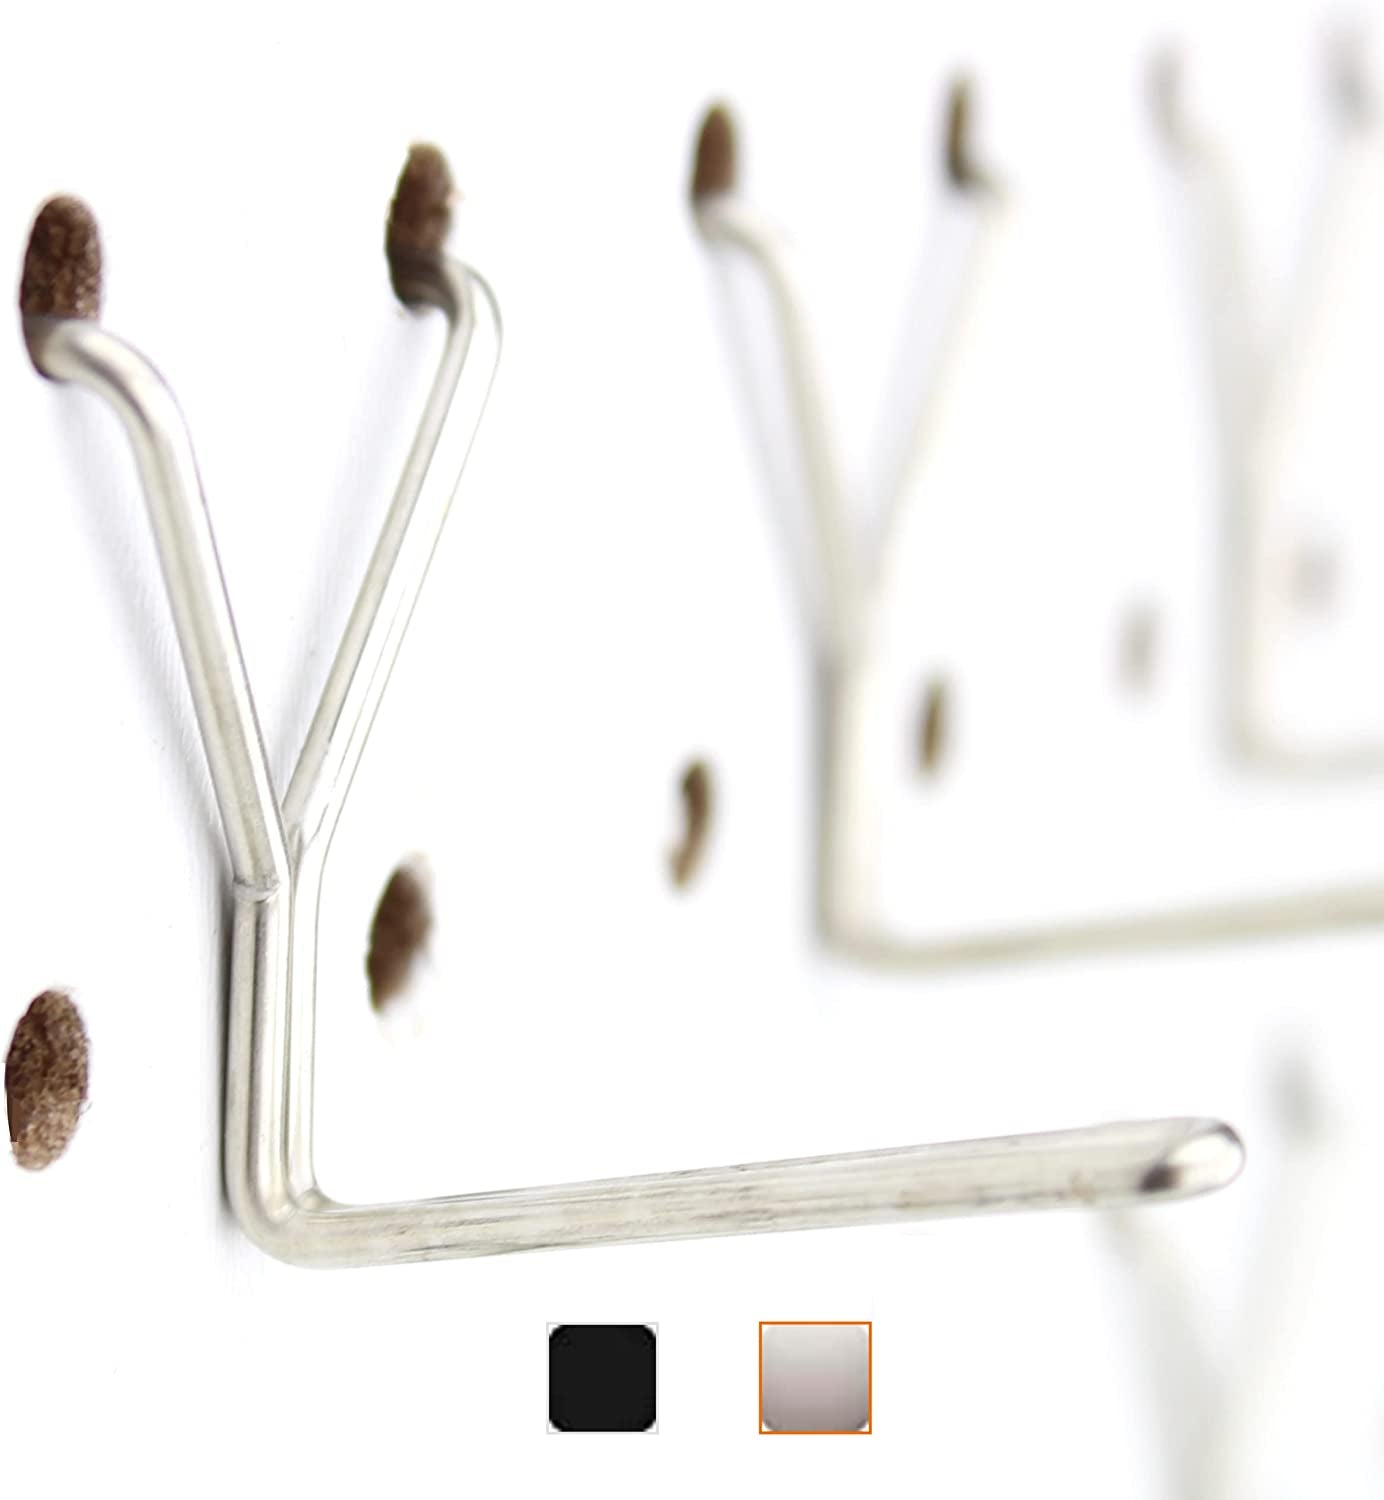 Right Arrange, Metal Pegboard Hooks 50-Pack 2" + 4” L Hook - Will Not Fall Out - Fits Any Peg Board - Black - Organize Tools, Accessories, Workbench, Garage Storage, Kitchen, Craft or Hobby Supplies, Jewelry